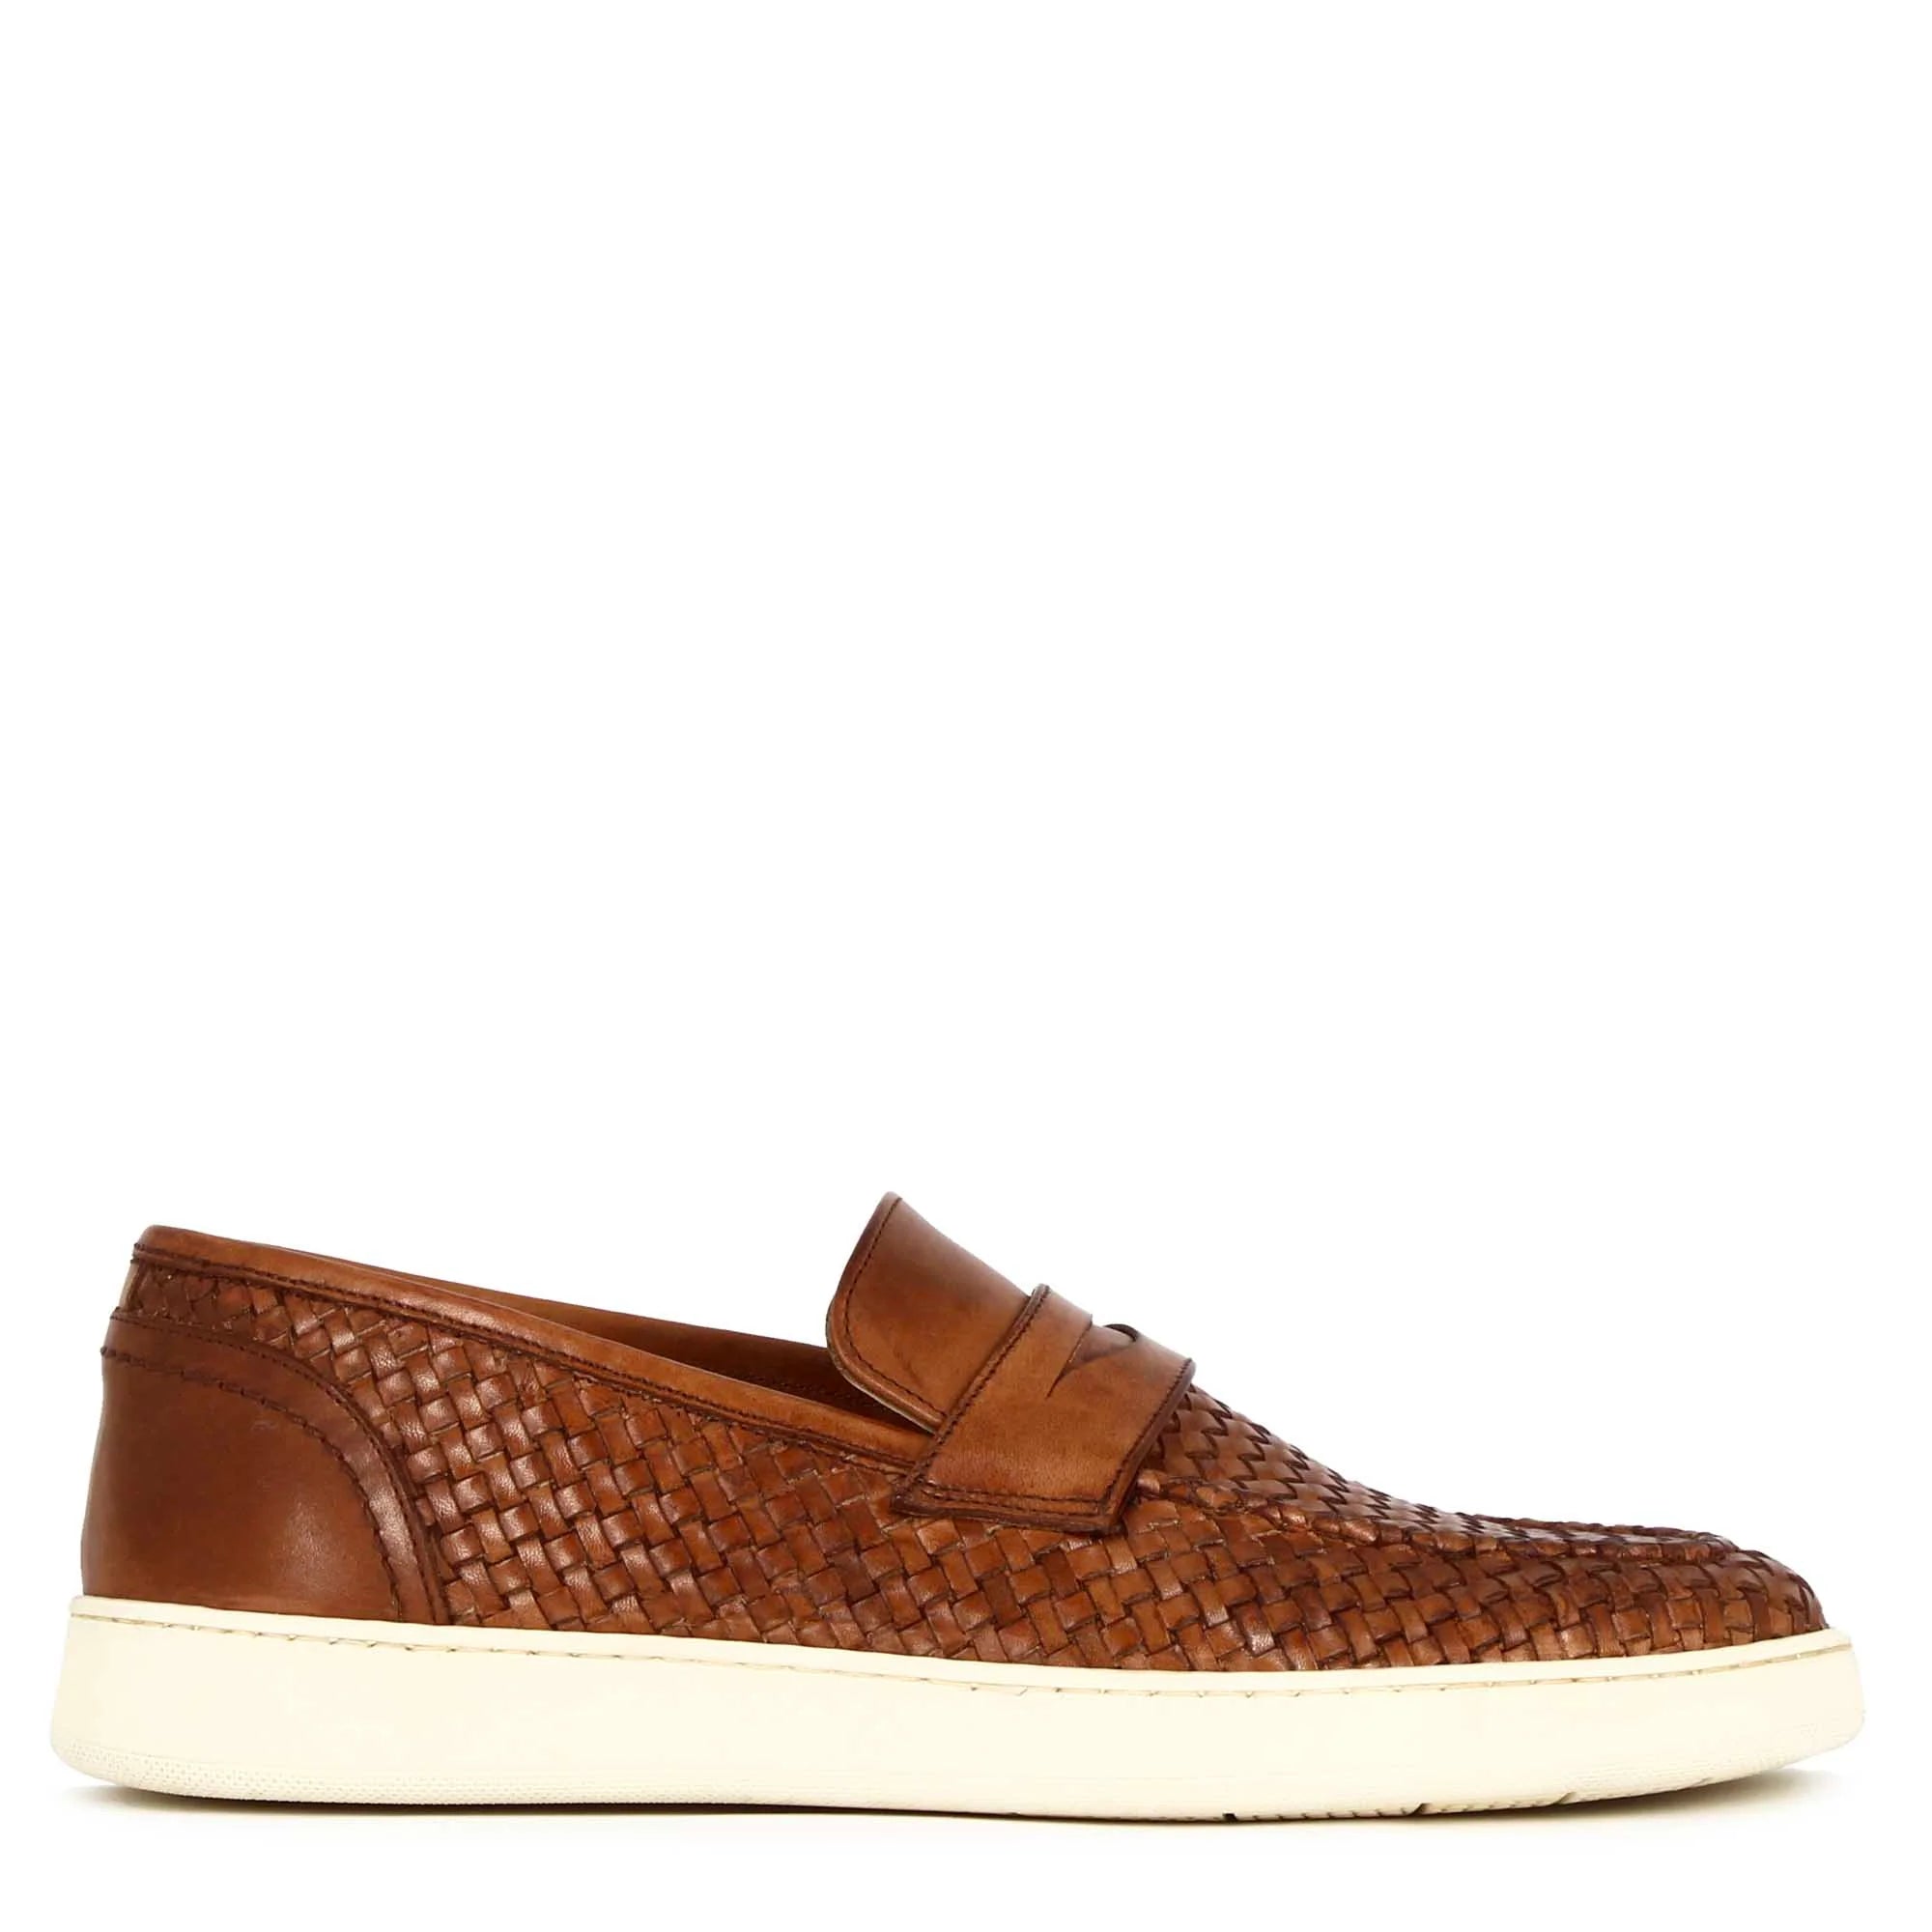 Men's sneaker made of woven leather brown color